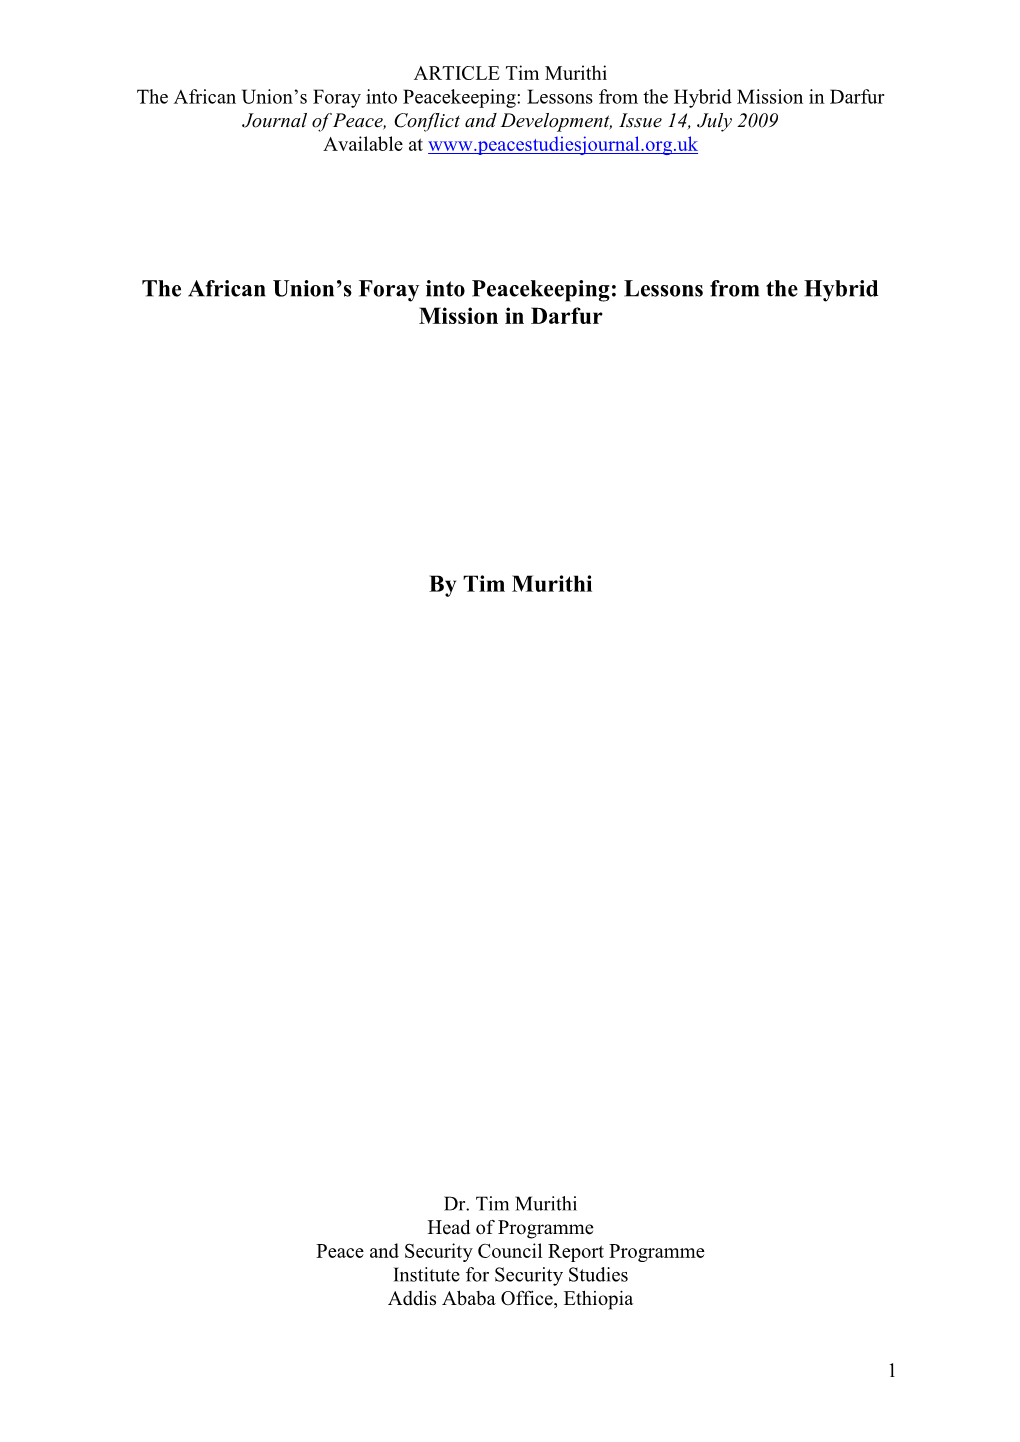 The African Union's Foray Into Peacekeeping: Lessons from The